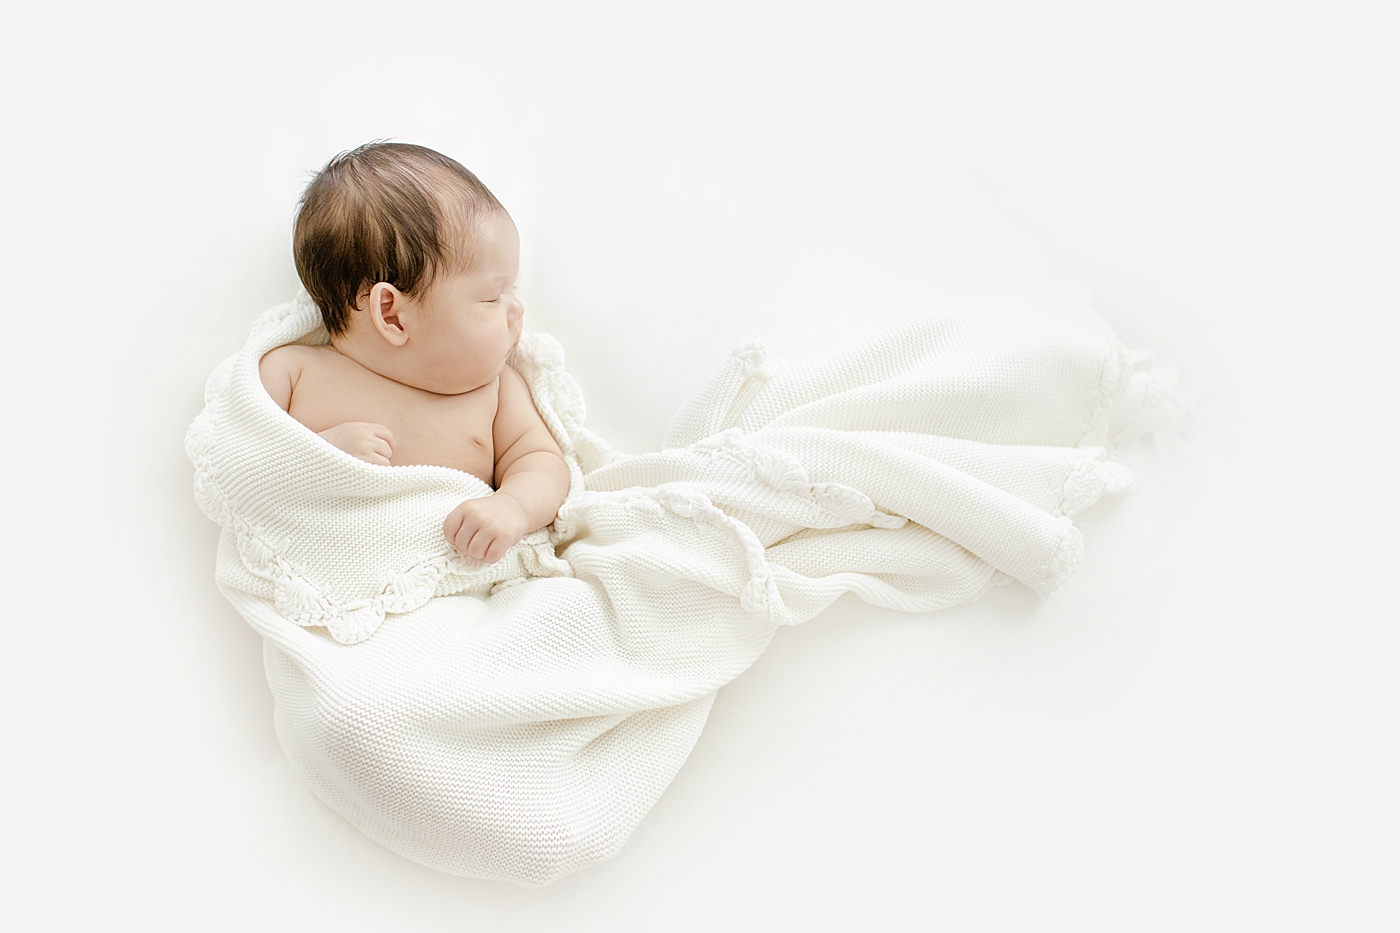 Baby girl wrapped in a white blanket | Image by Chrissy Winchester